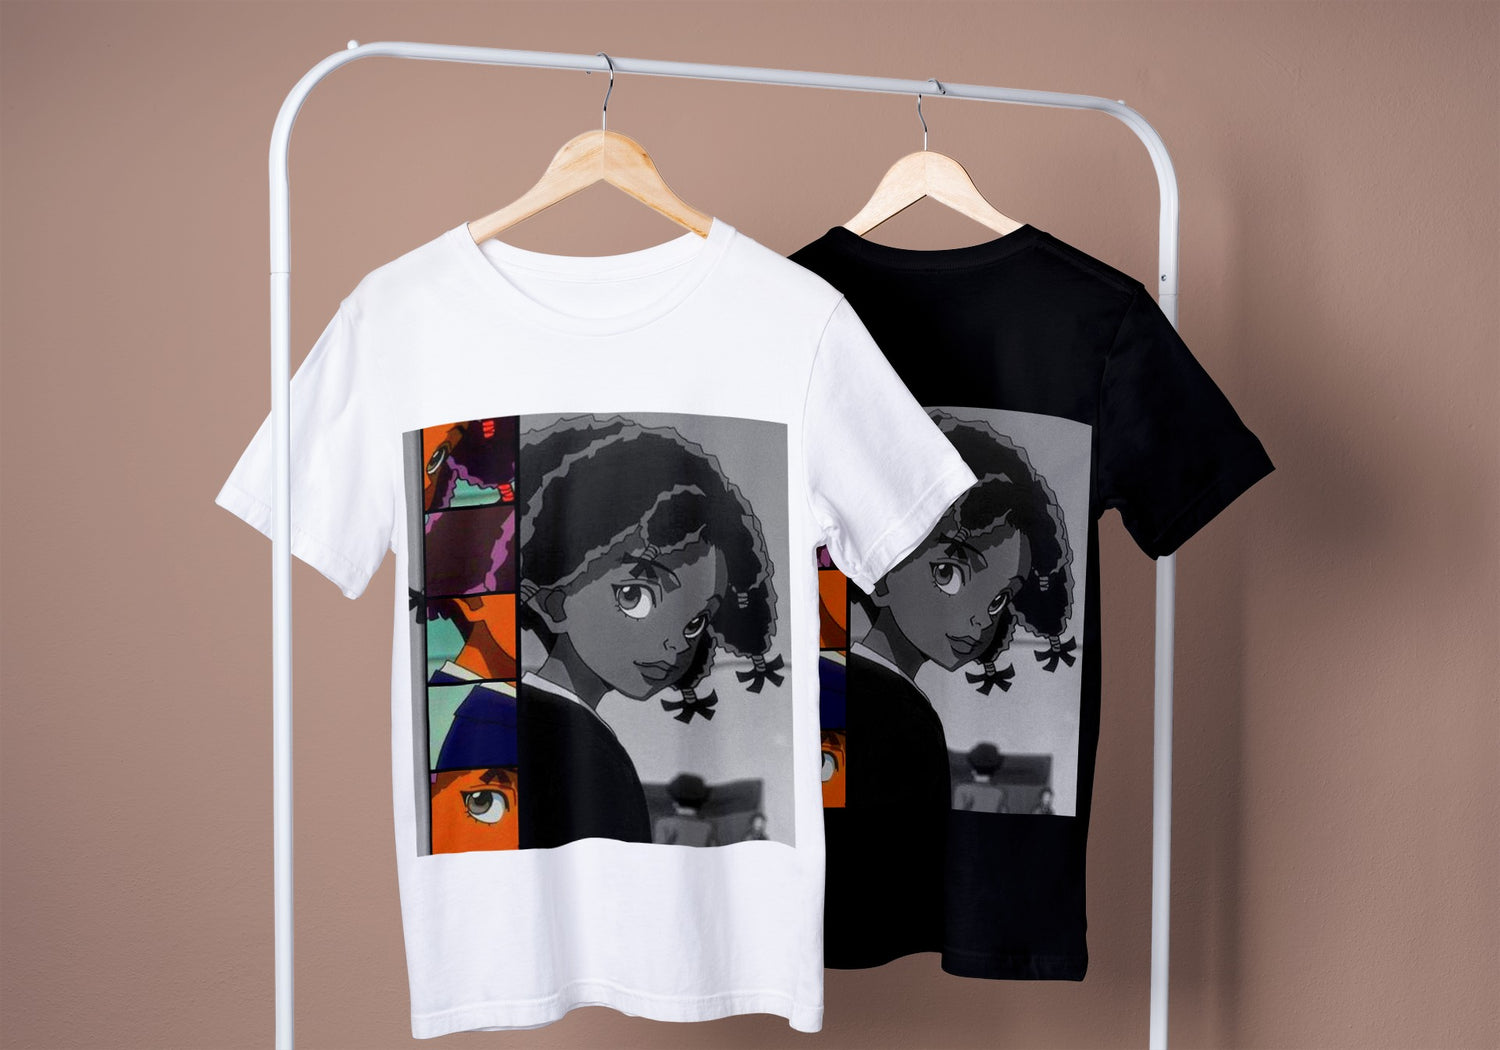  graphic tee of canary from hunter x hunter, one in white on the left and one in black on the right